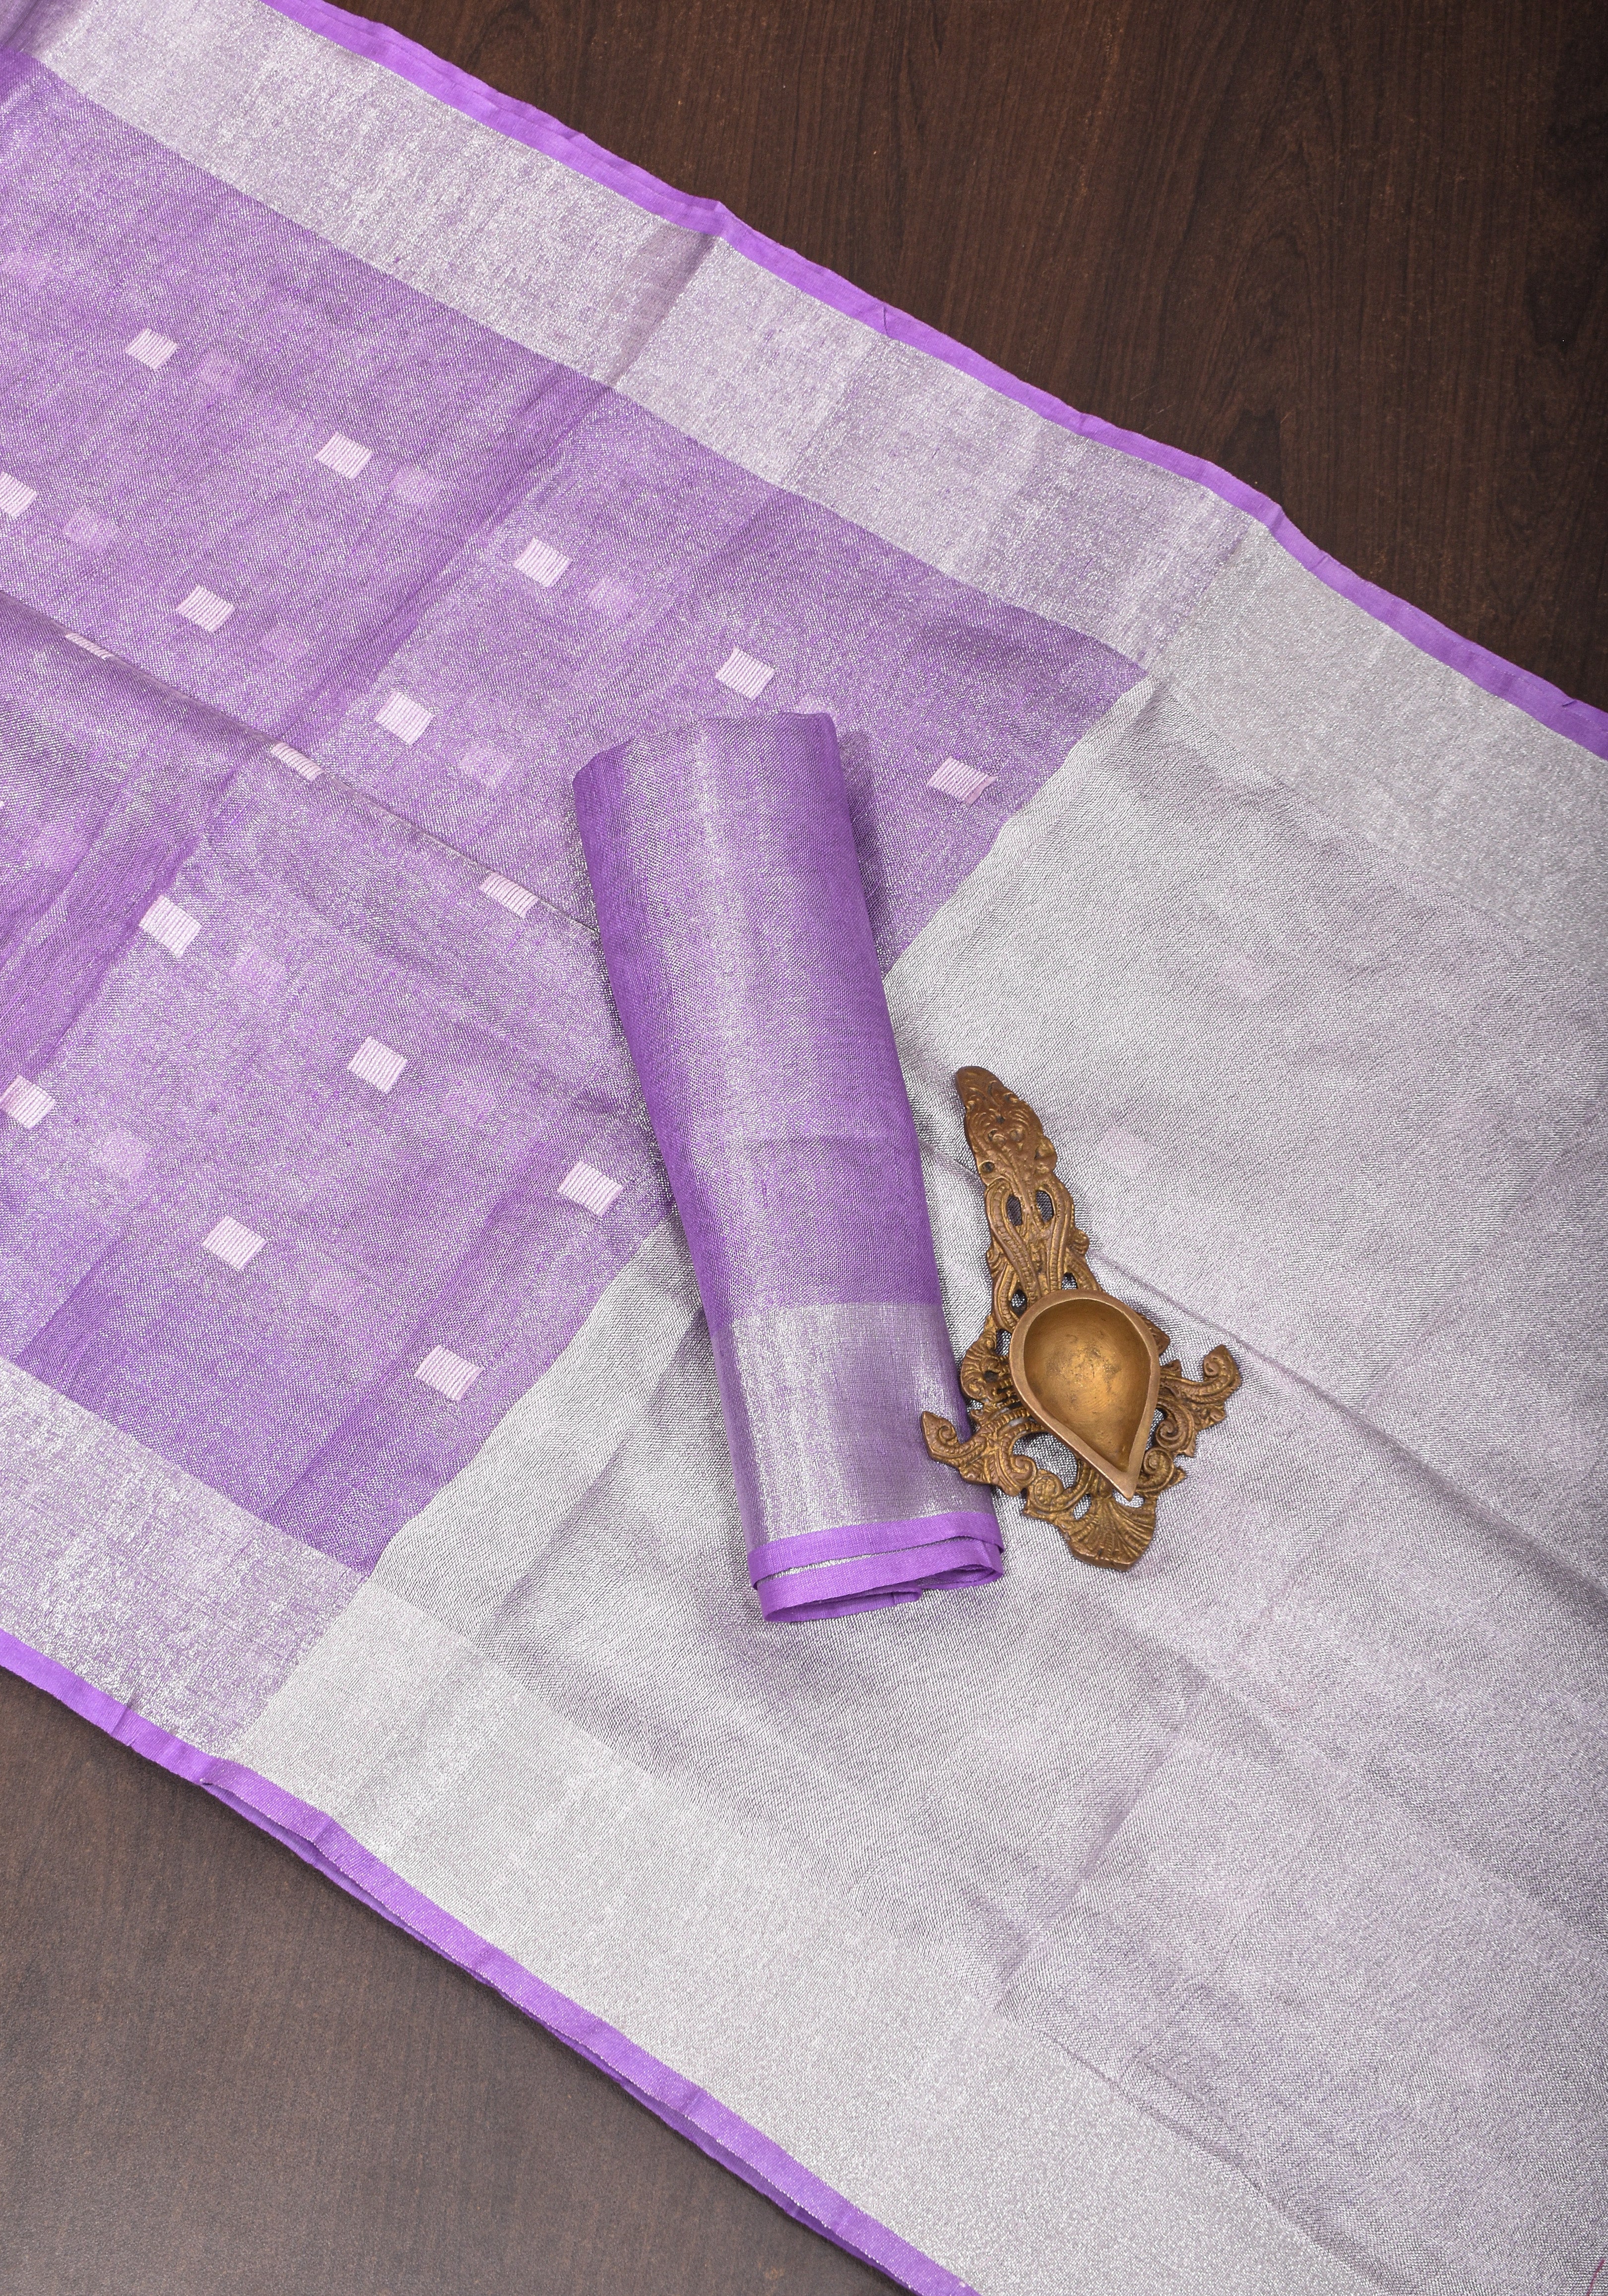 Lavender Hued Tissue Linen Saree with silver zari borders and long tassels!